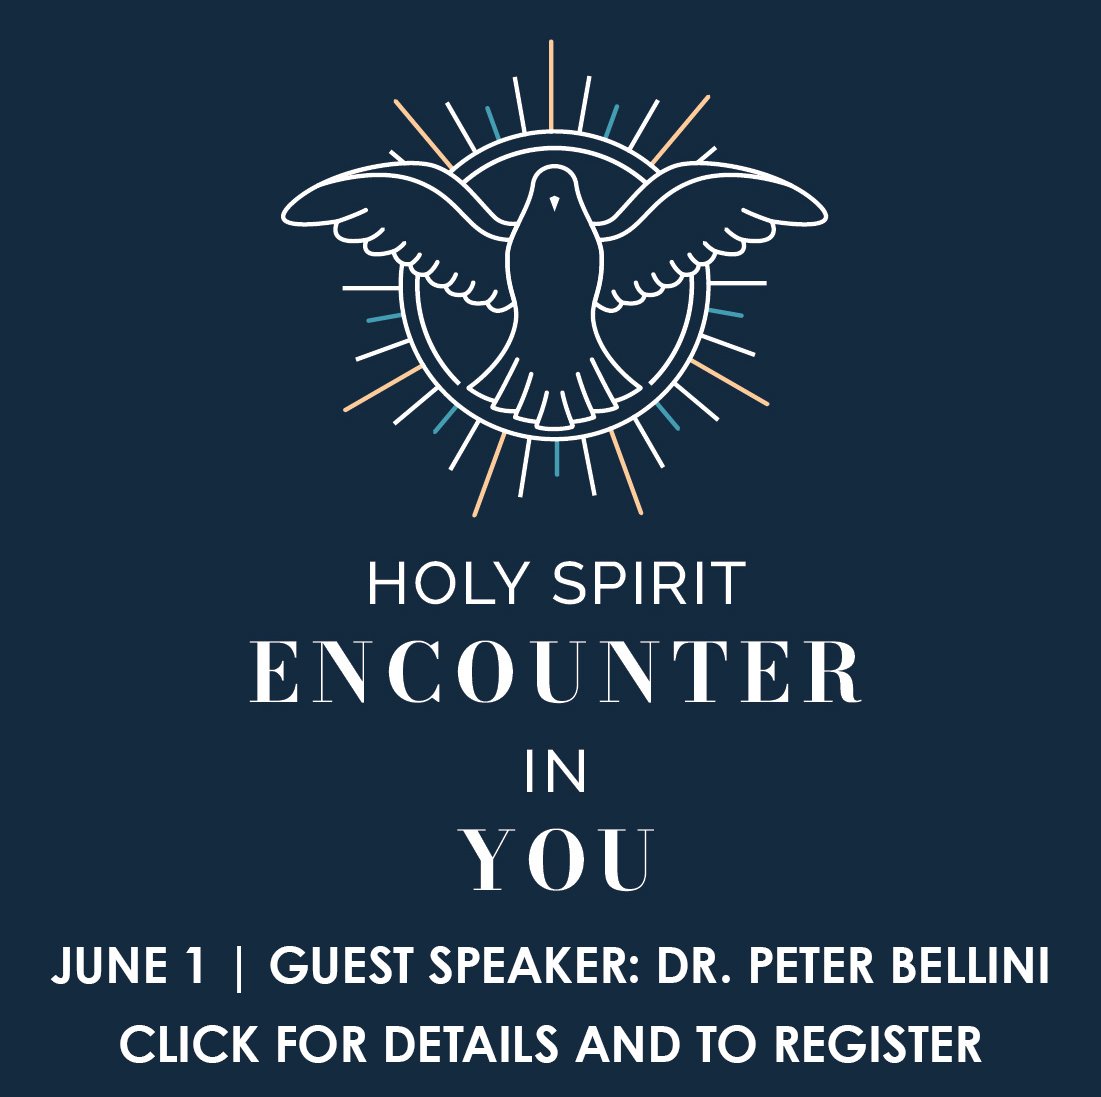 Holy Spirit Encounter In You - AD Events_2 copy.jpg